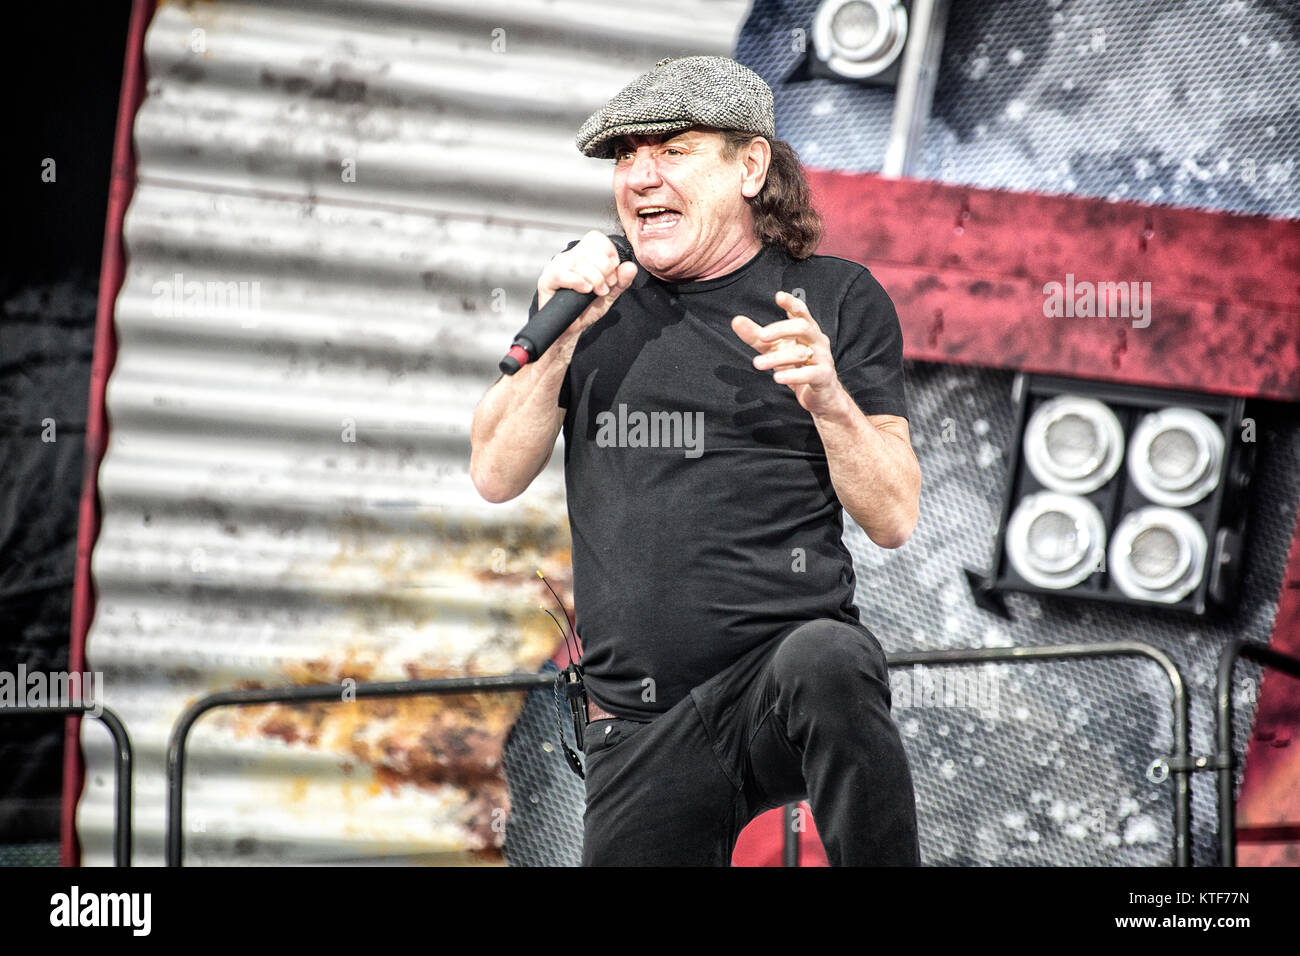 The Australian rock band AC/DC performs a live concert at Valle Hovin Stadion in Oslo as part of the Rock or Bust World 2015 Tour. Here vocalist Brian Johnson seen live on stage. Norway, 17/07 2015. Stock Photo